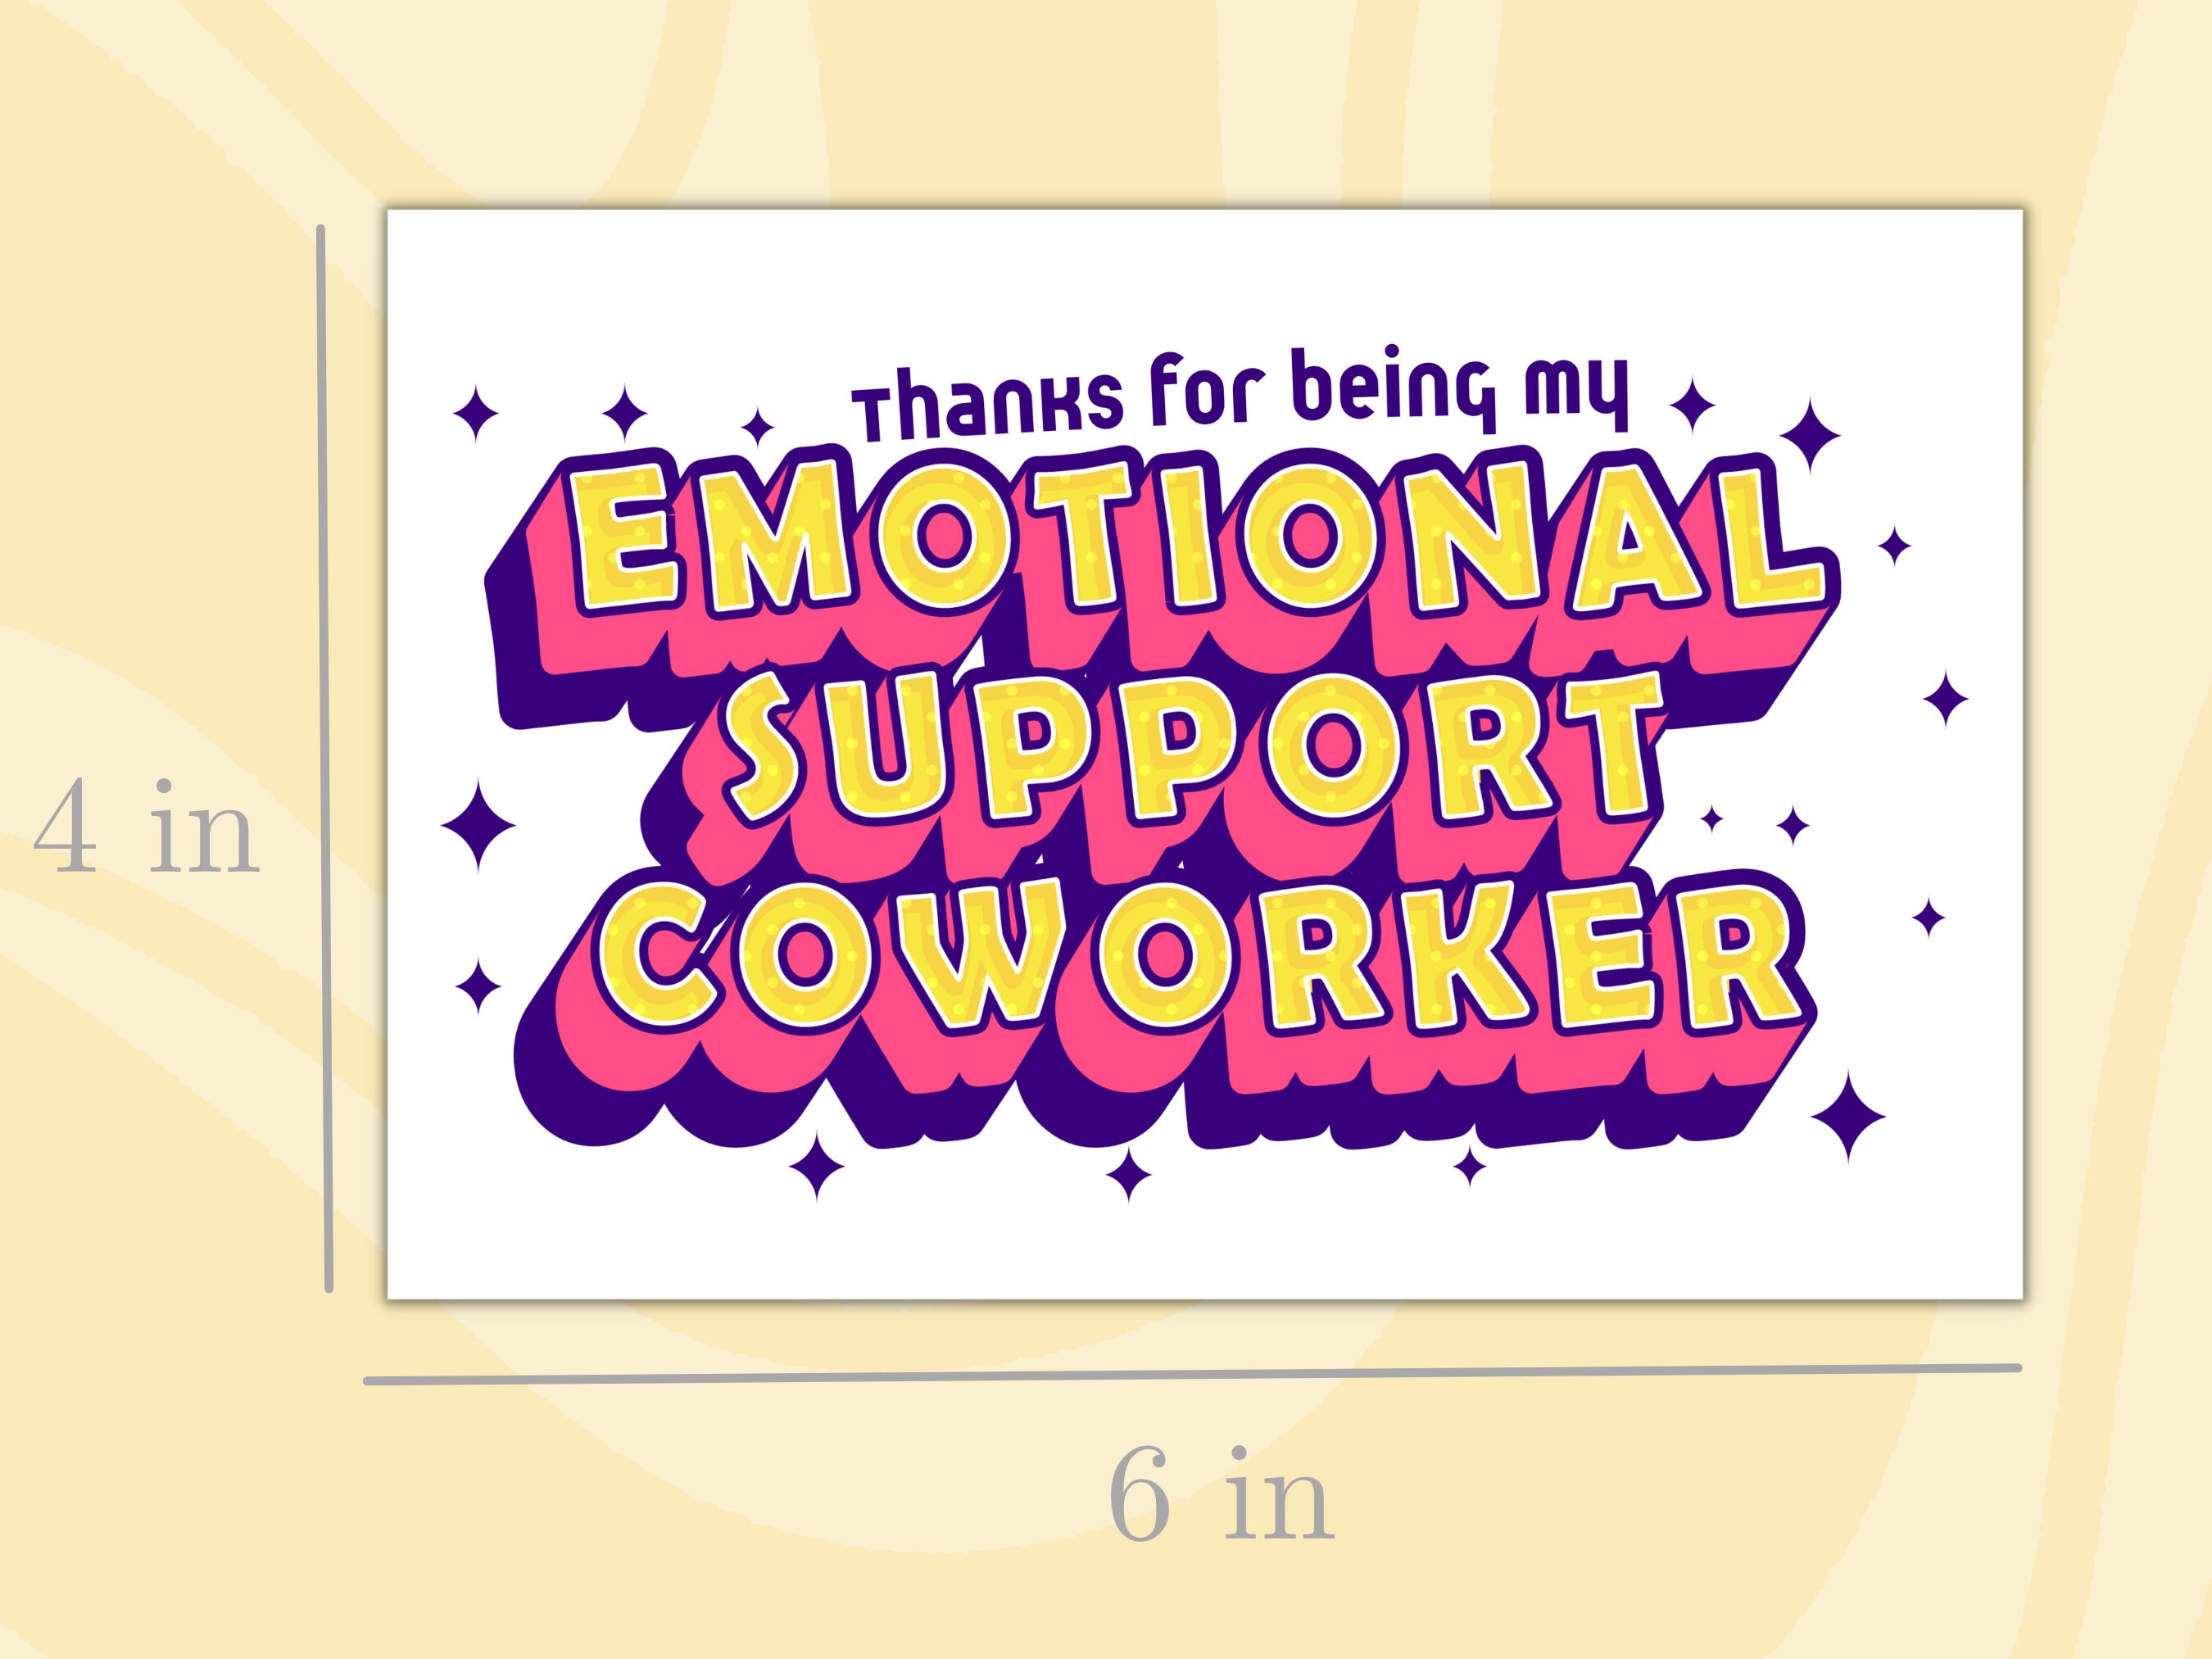 Thank you for being my emotional support coworker 40 oz 2 piece